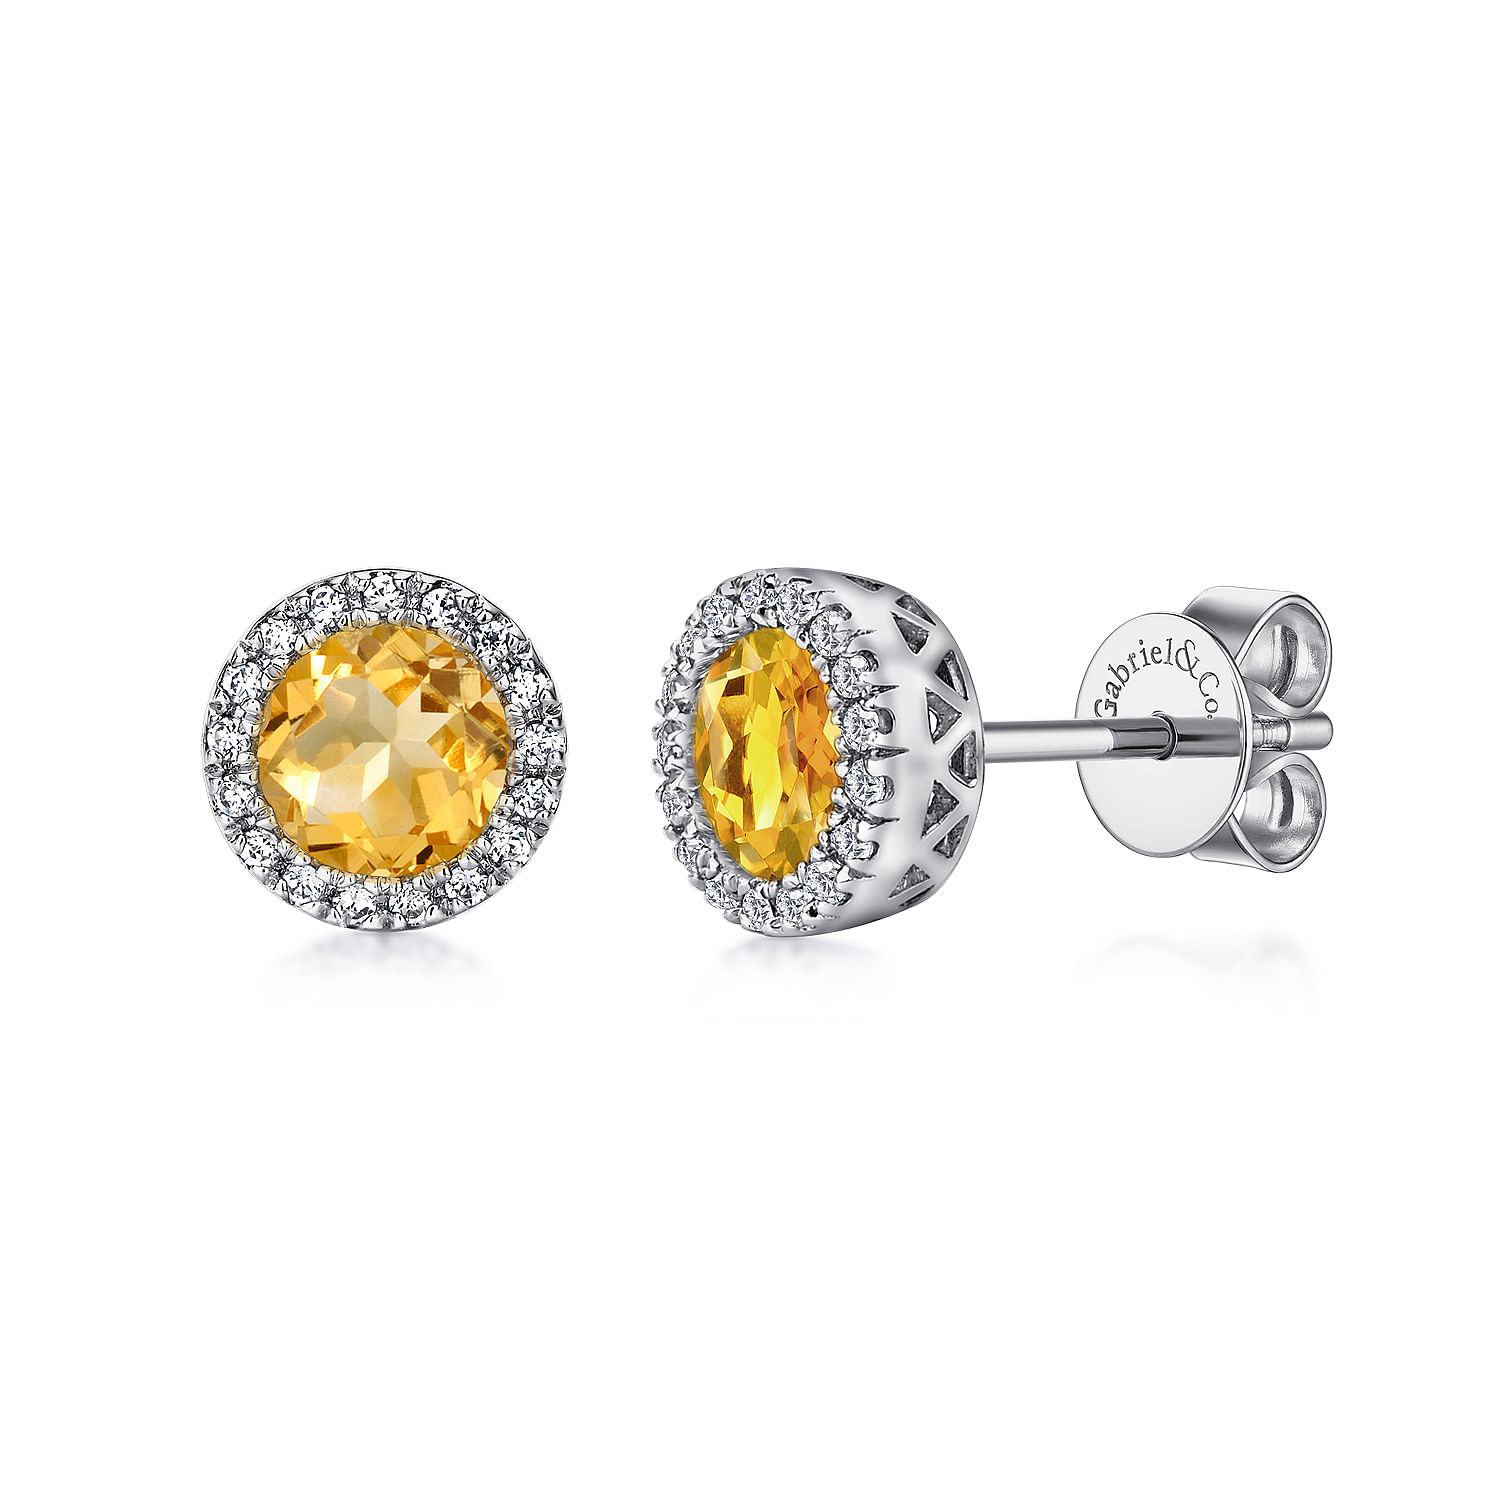 Gabriel - 14K White Gold Round Halo Citrine and Diamond Stud Earrings